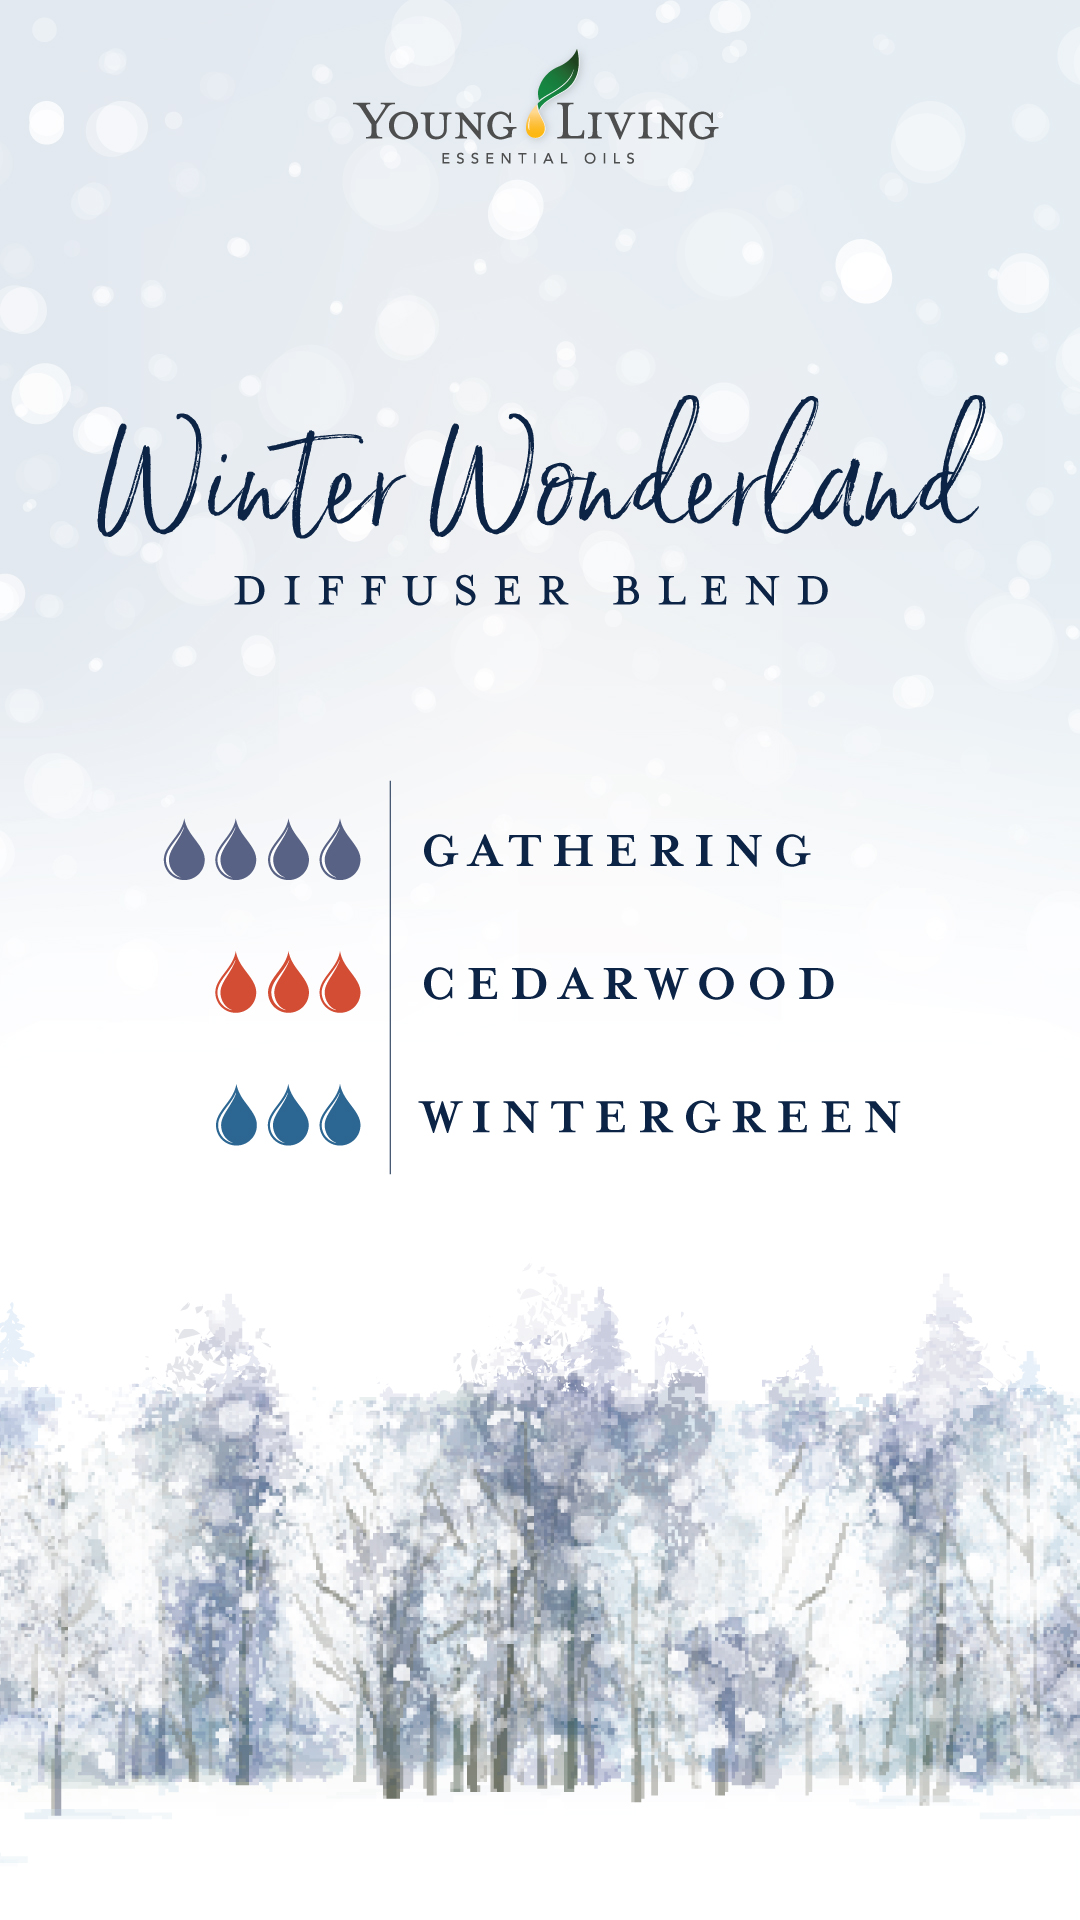 The Best Essential Oil Blends for Winter